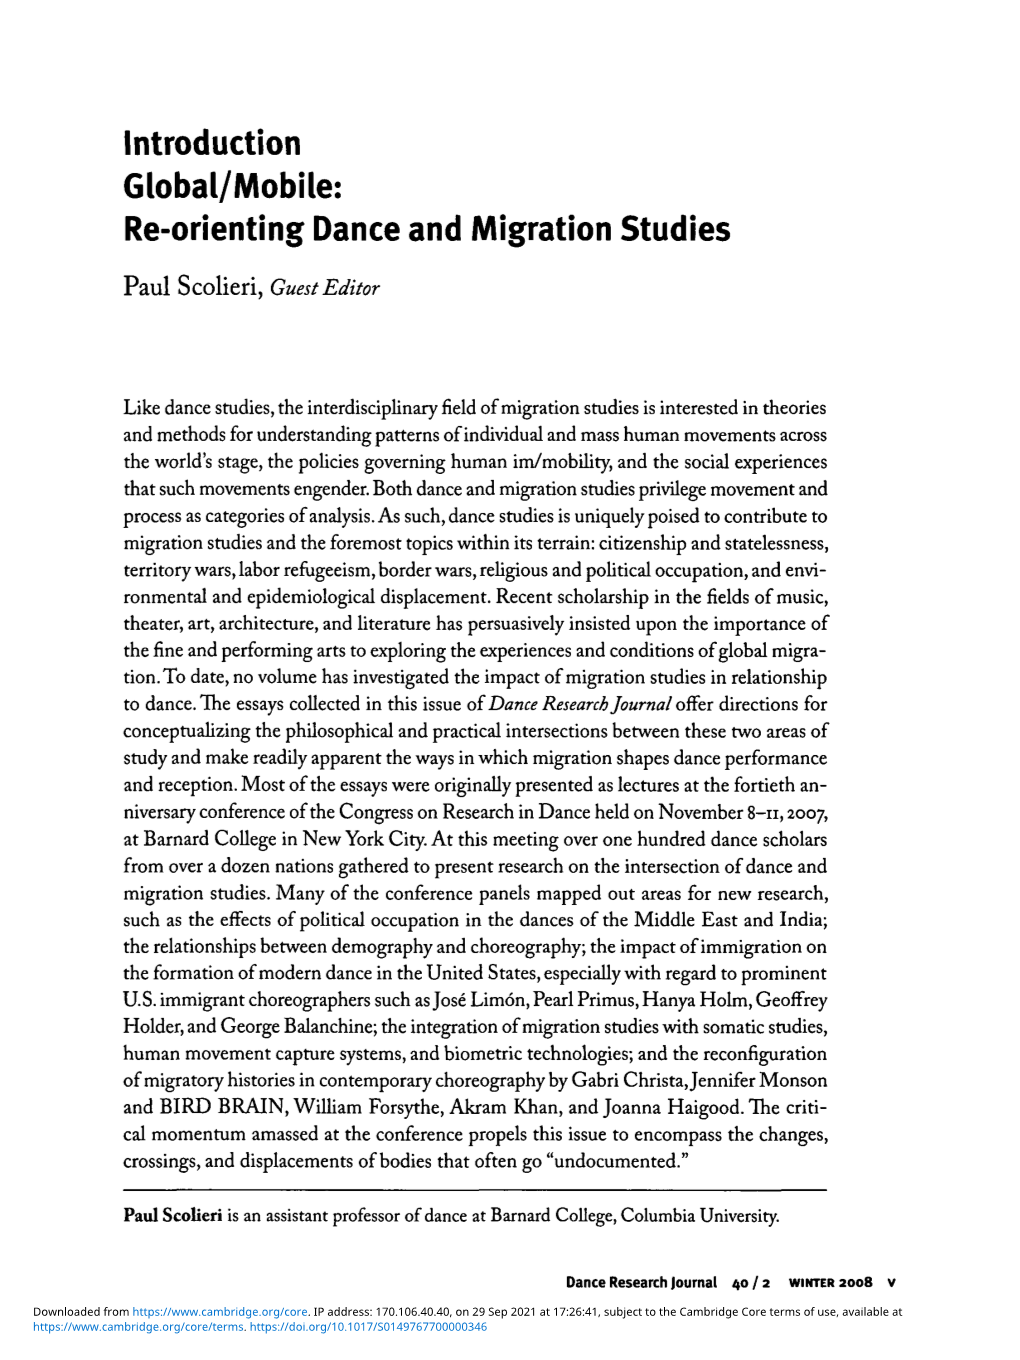 Re-Orienting Dance and Migration Studies